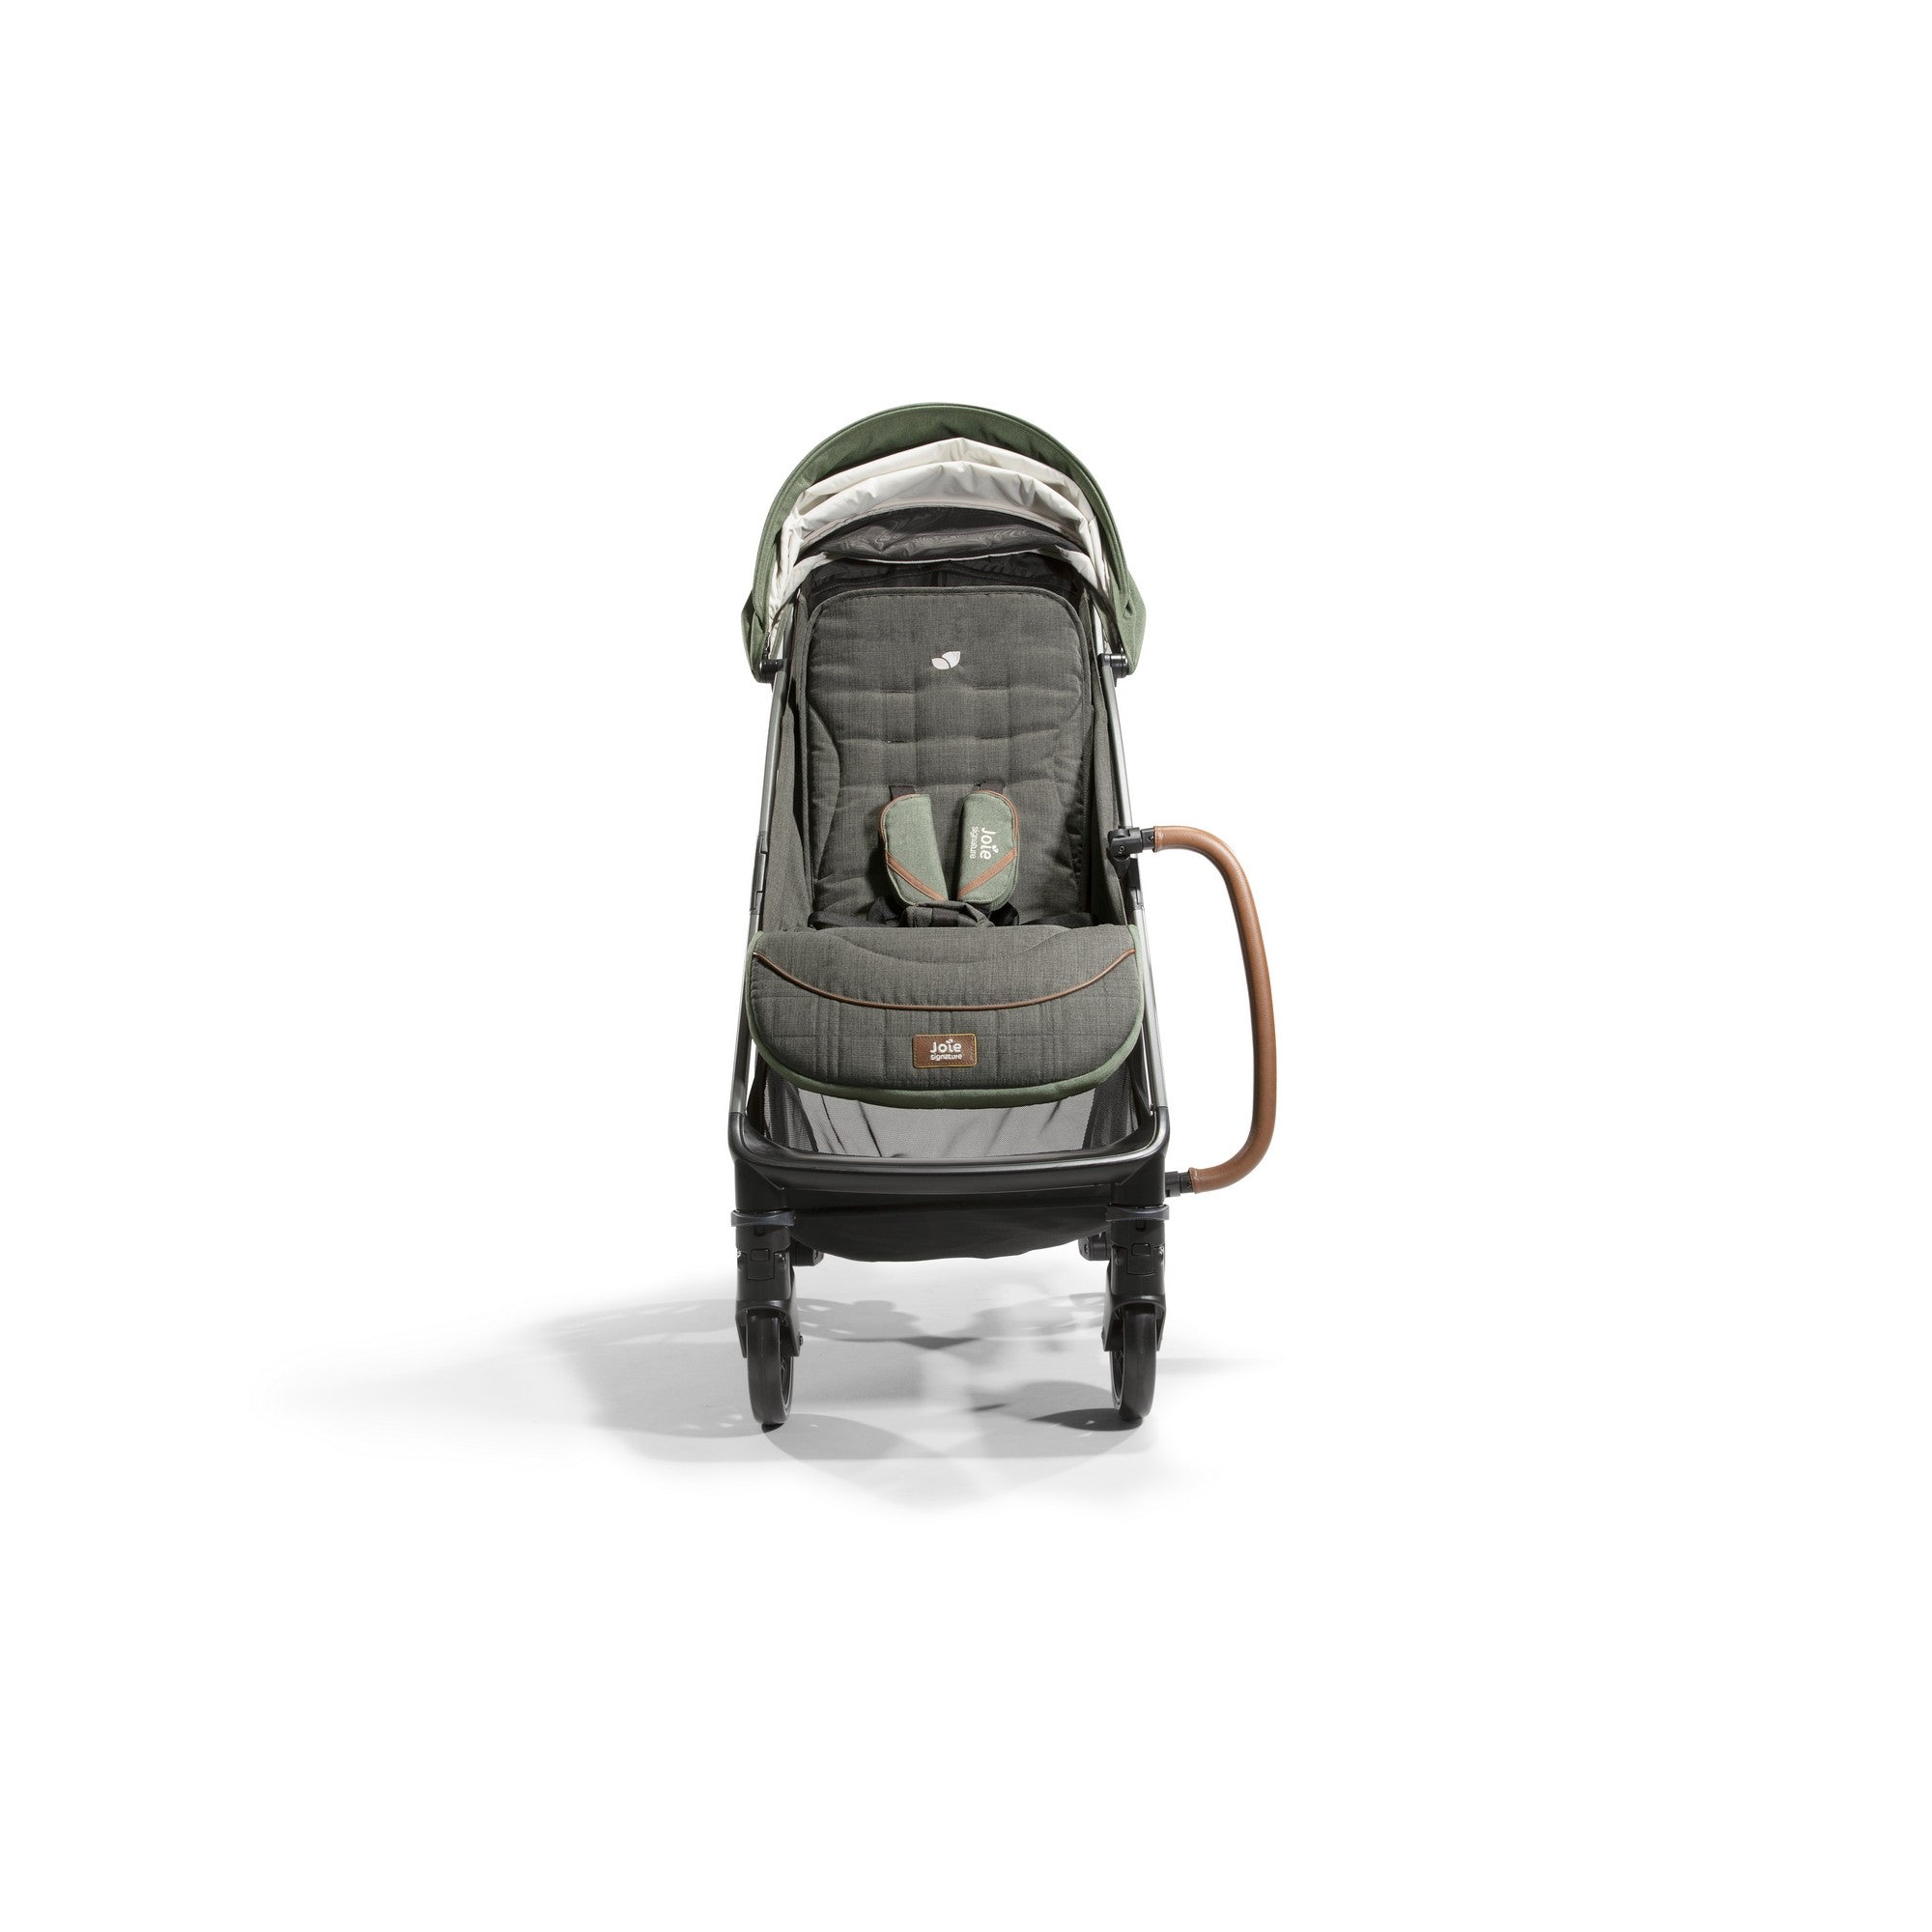 Joie Parcel 3in1 compact stroller - Pine